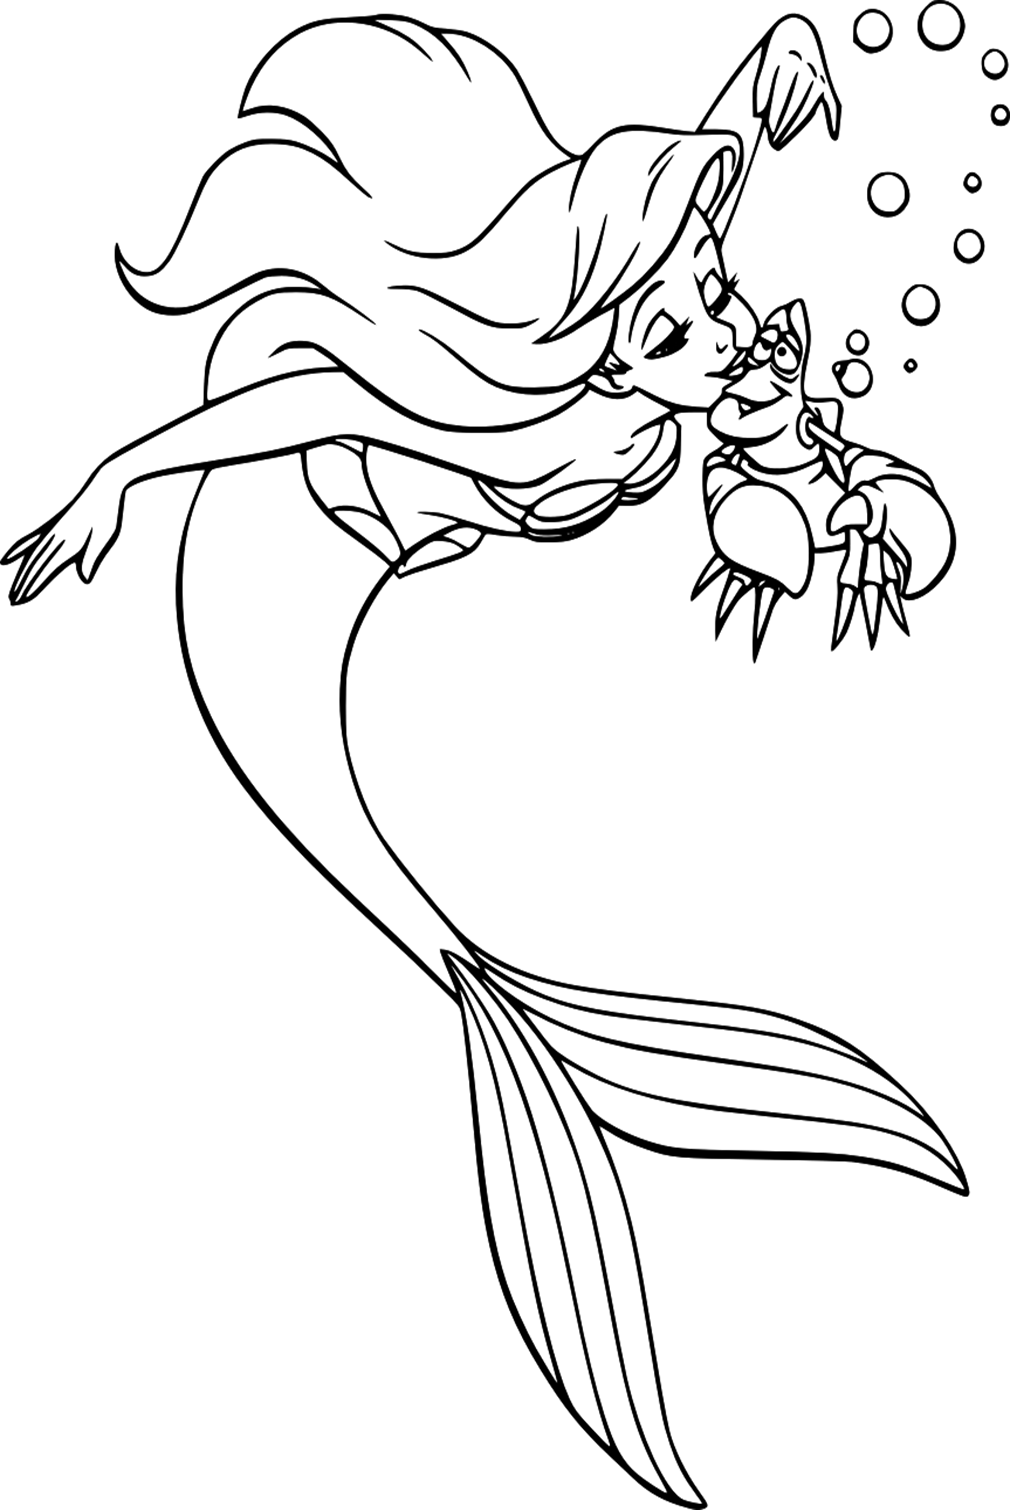 The Little Mermaid Free Colorig Pages